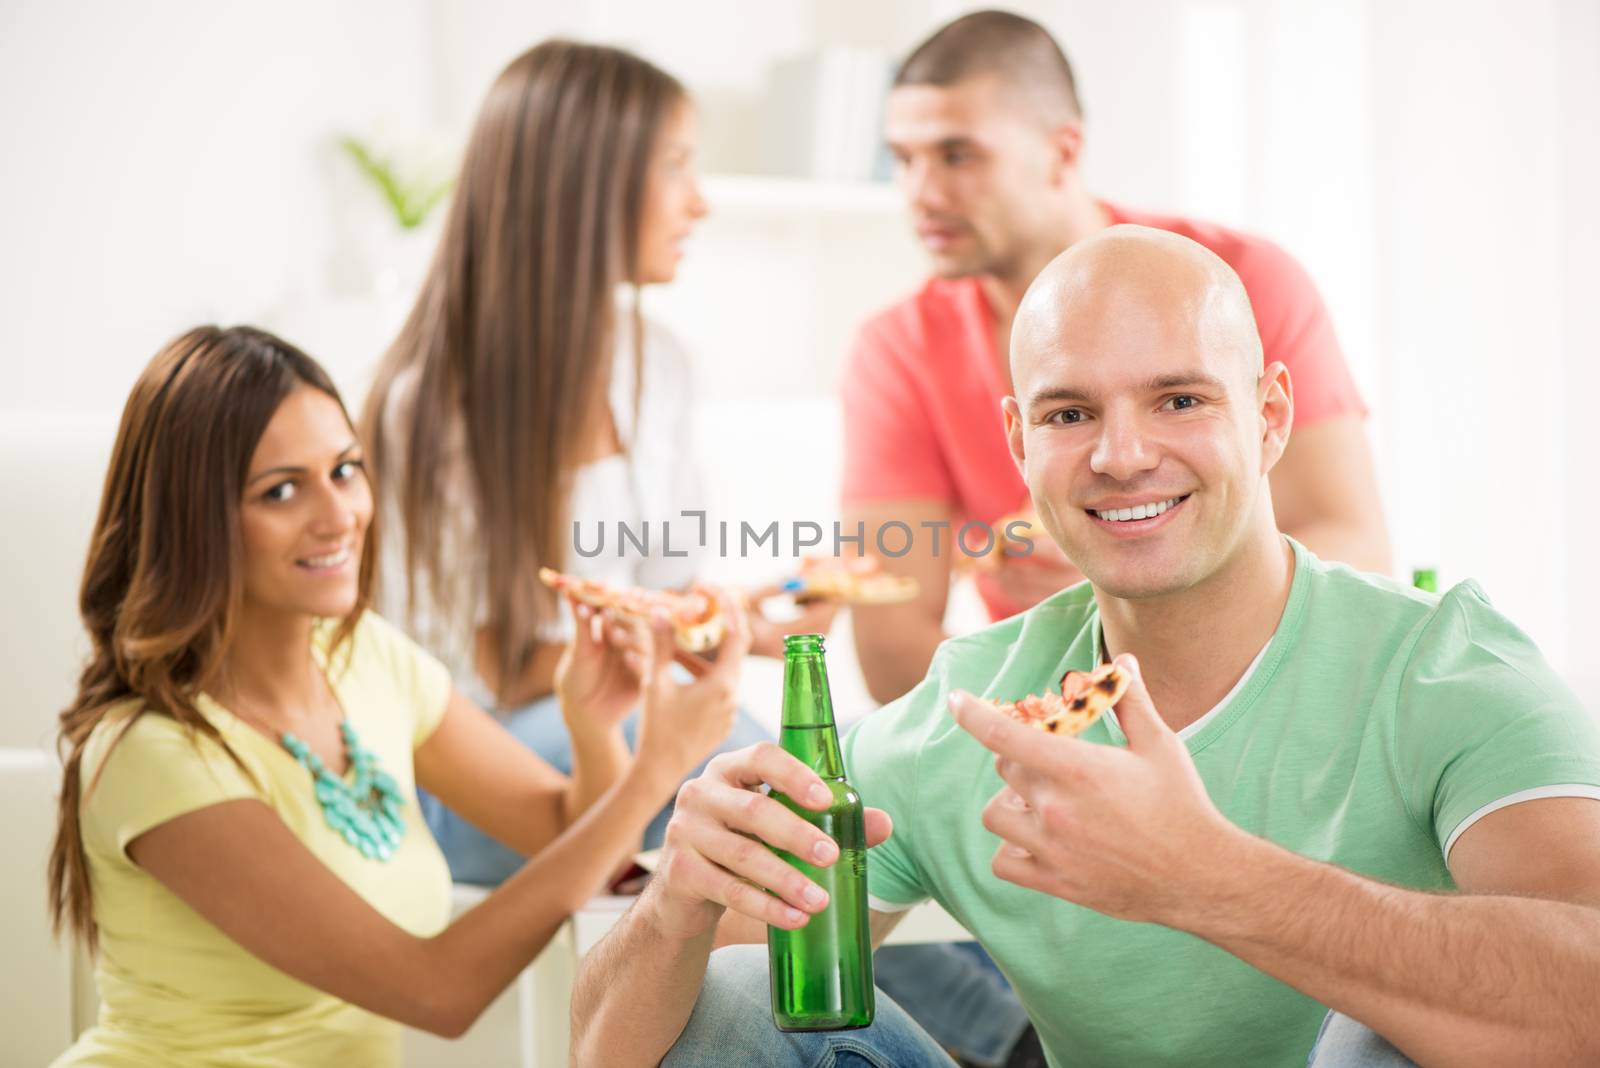 Close up of a young men smiling and eating pizza and drinking bear with her friends in the background.